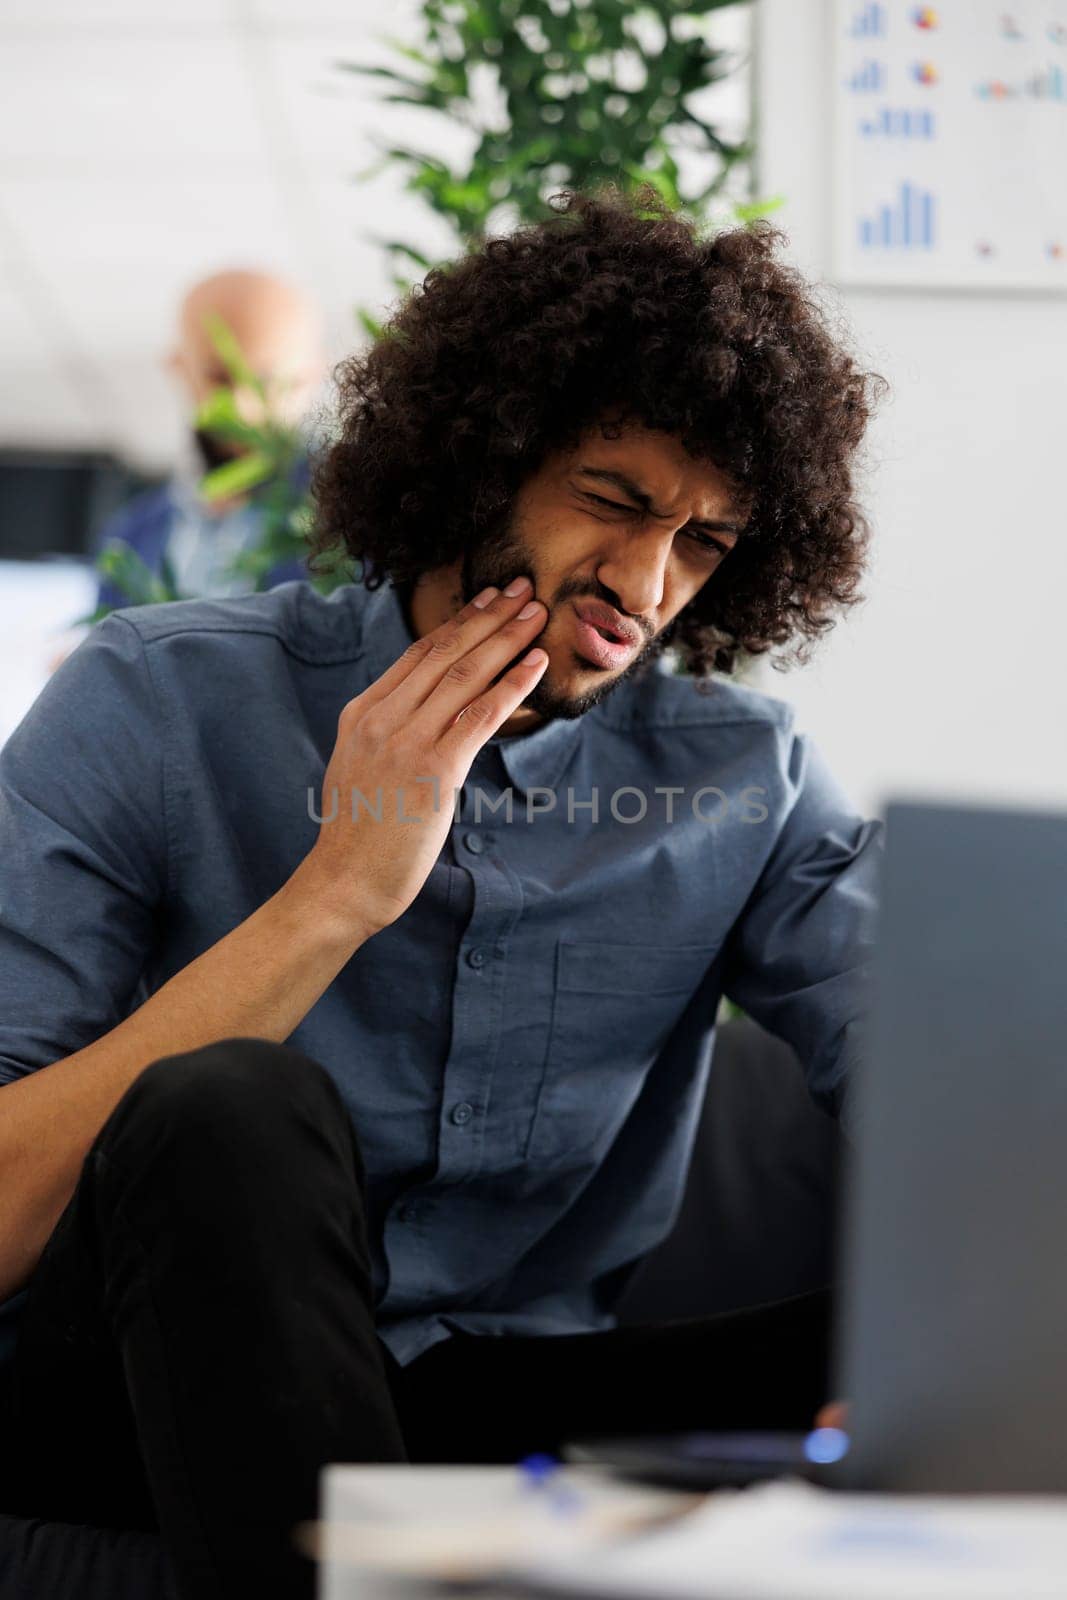 Young arab business employee suffering from toothache at workplace while working on laptop. Entrepreneur having tooth pain while sitting on couch in start up company office